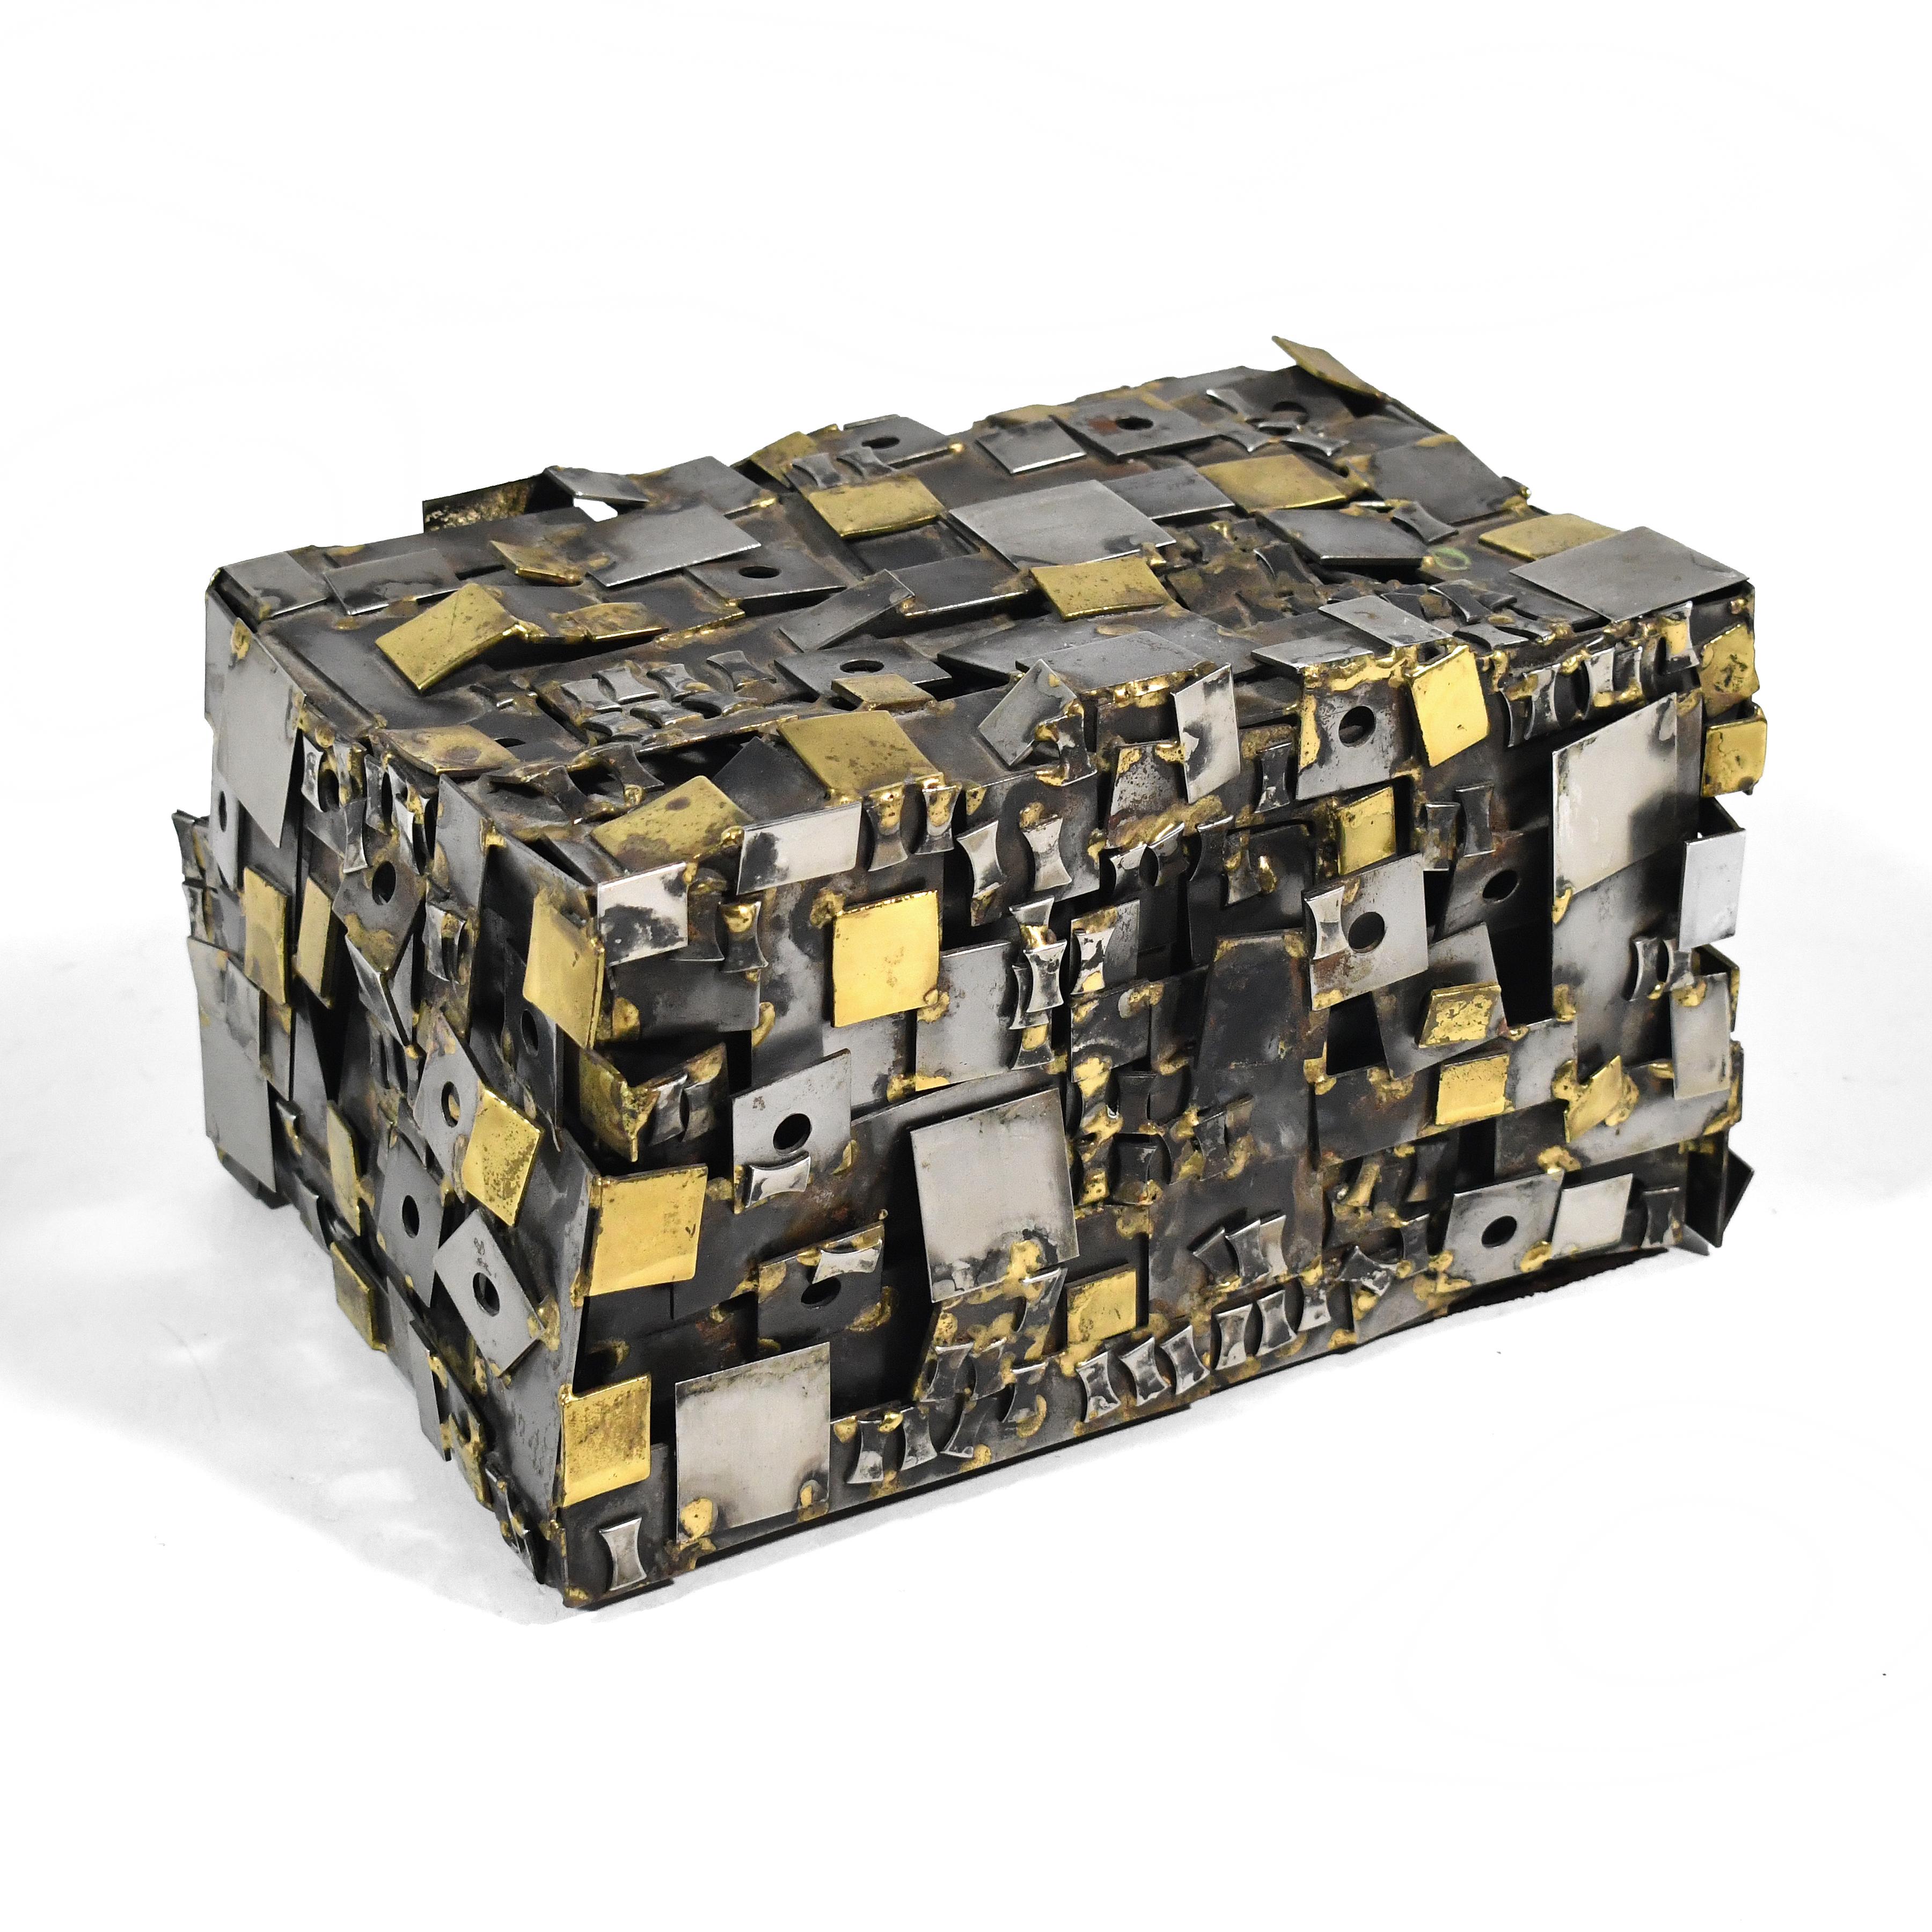 This striking brutalist piece by Chicago artist Richard Bitterman is as much a sculpture as a functional jewelry box. The highly active and textural surface is created of a patchwork of shapes in brass and chromed steel. It has a cleverly hidden